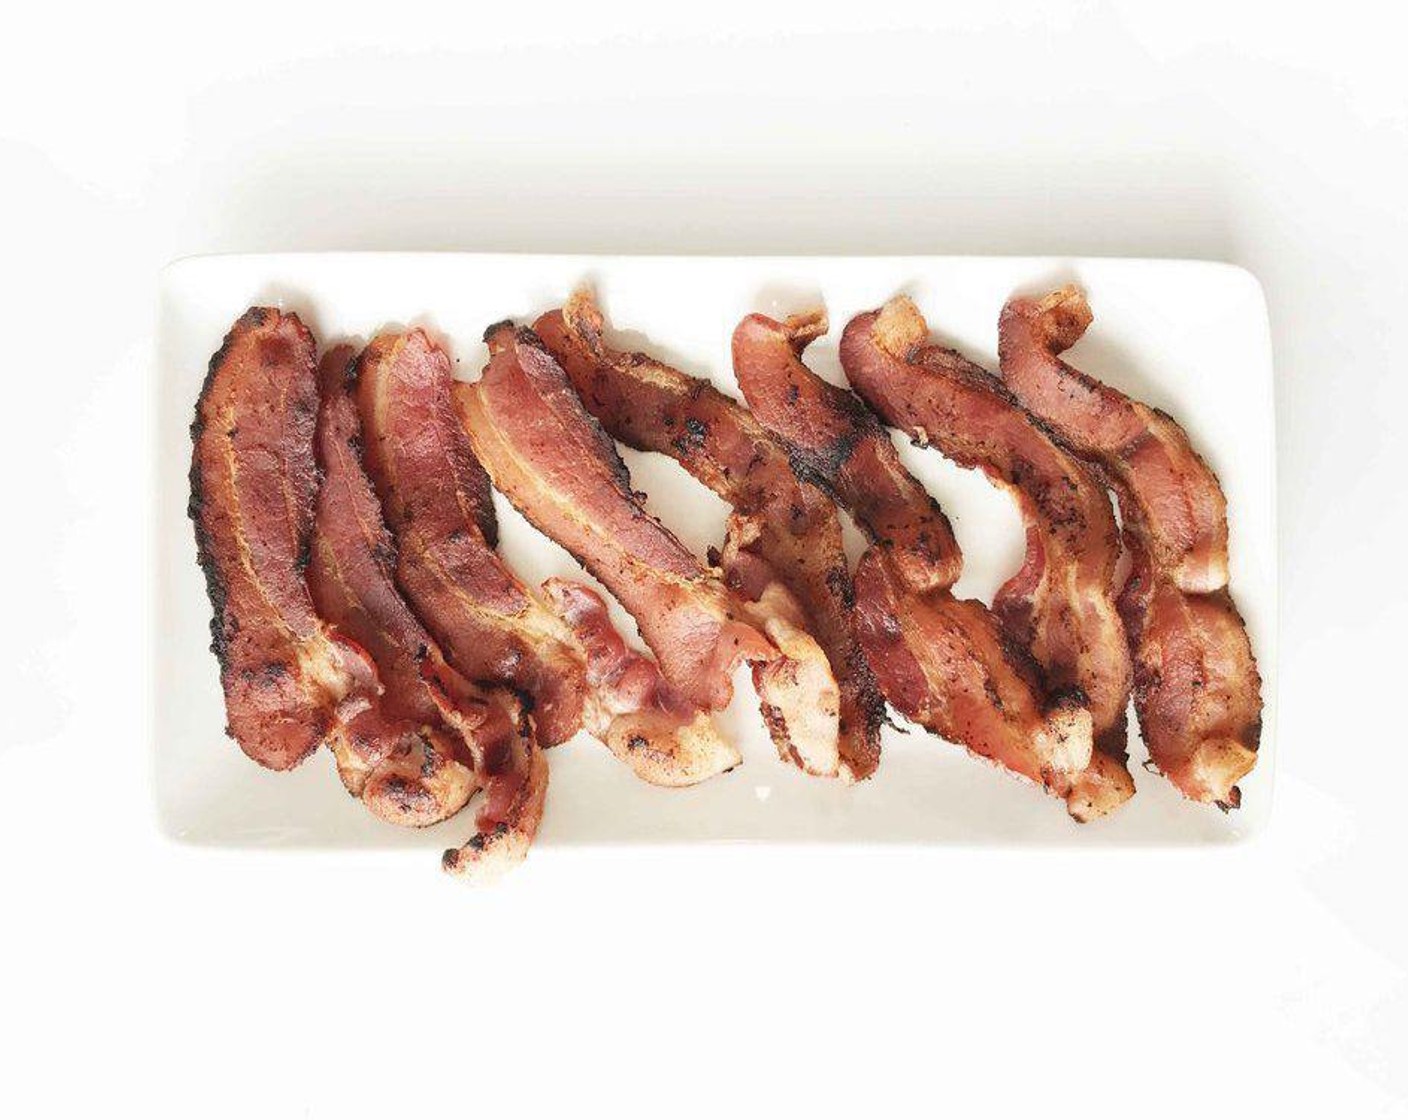 step 1 Cook up the Smoked Hickory Bacon (8 slices) via the method of choice; microwave, stove, or even baked in the oven.